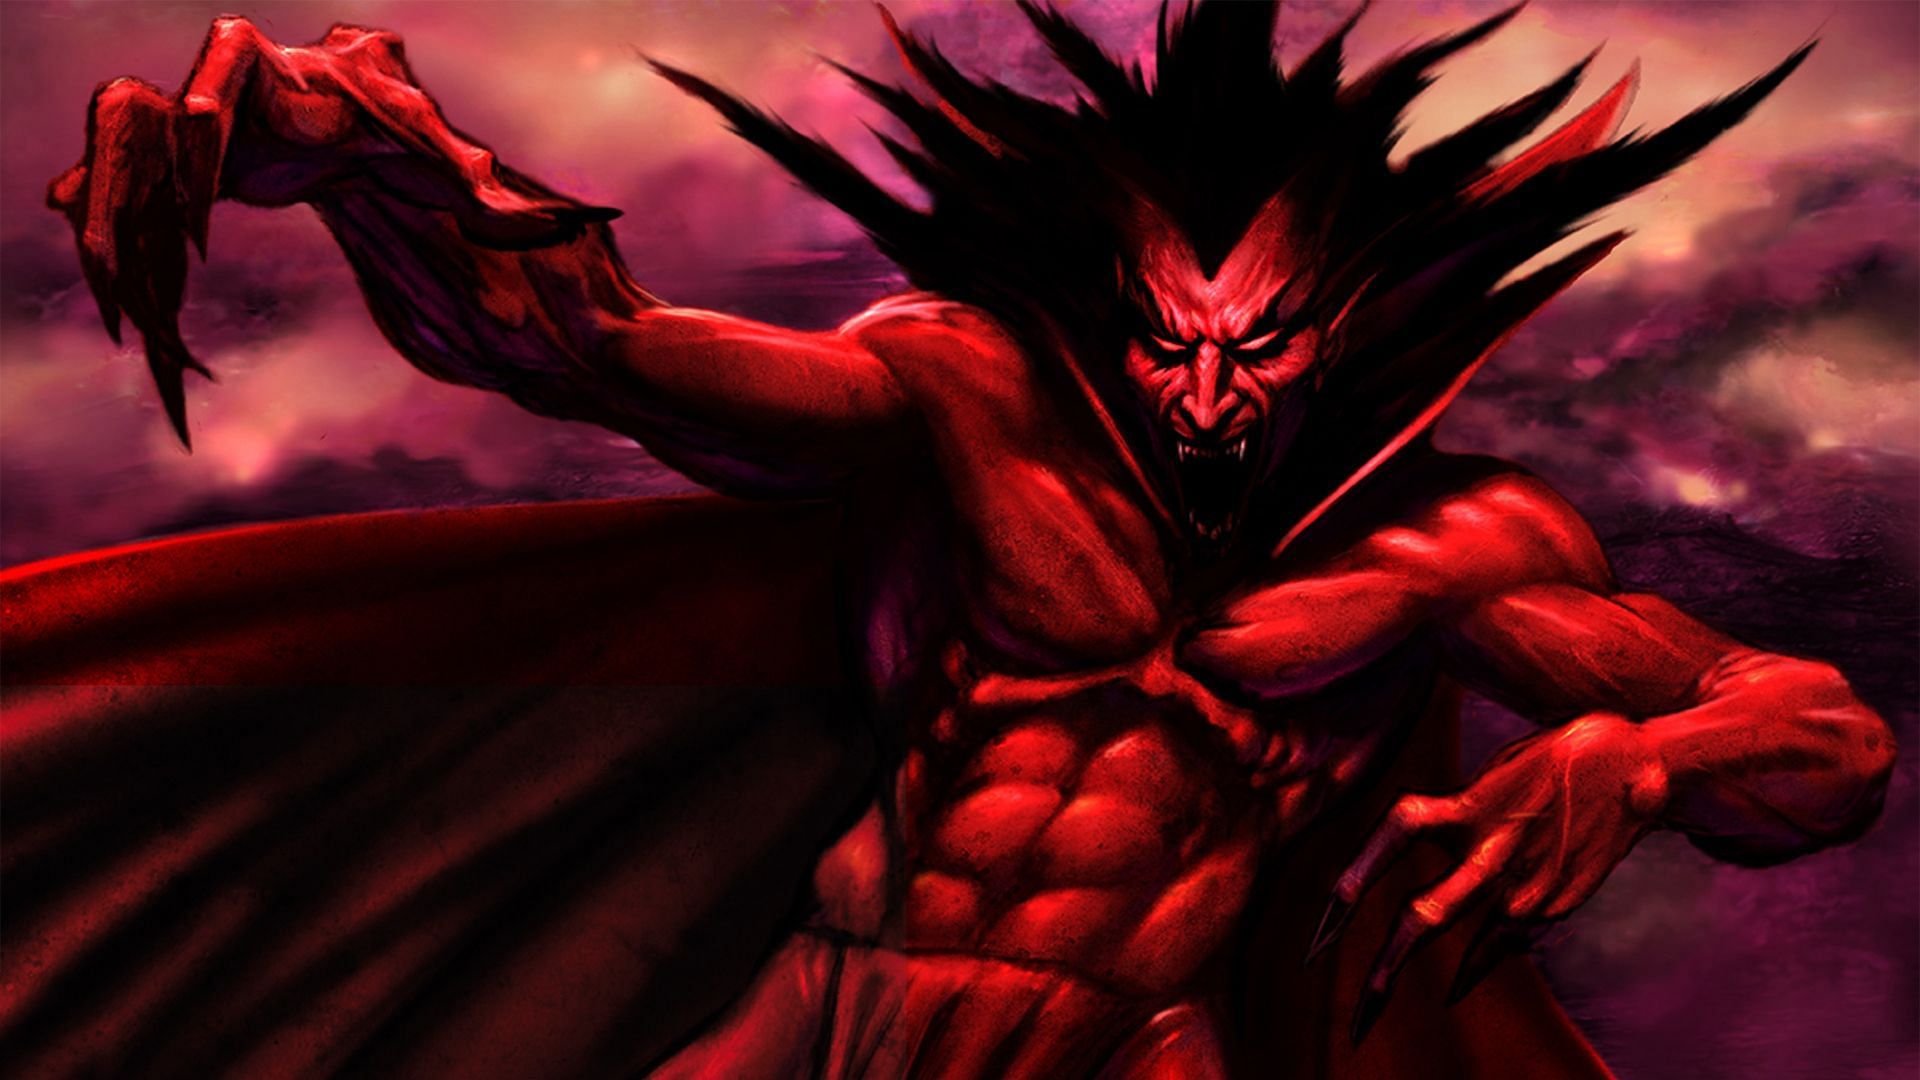 Mephisto is a demon lord who delights in tempting and corrupting souls. He is known for making deals and bargains with mortals, often resulting in their damnation (Image via Marvel Comics)